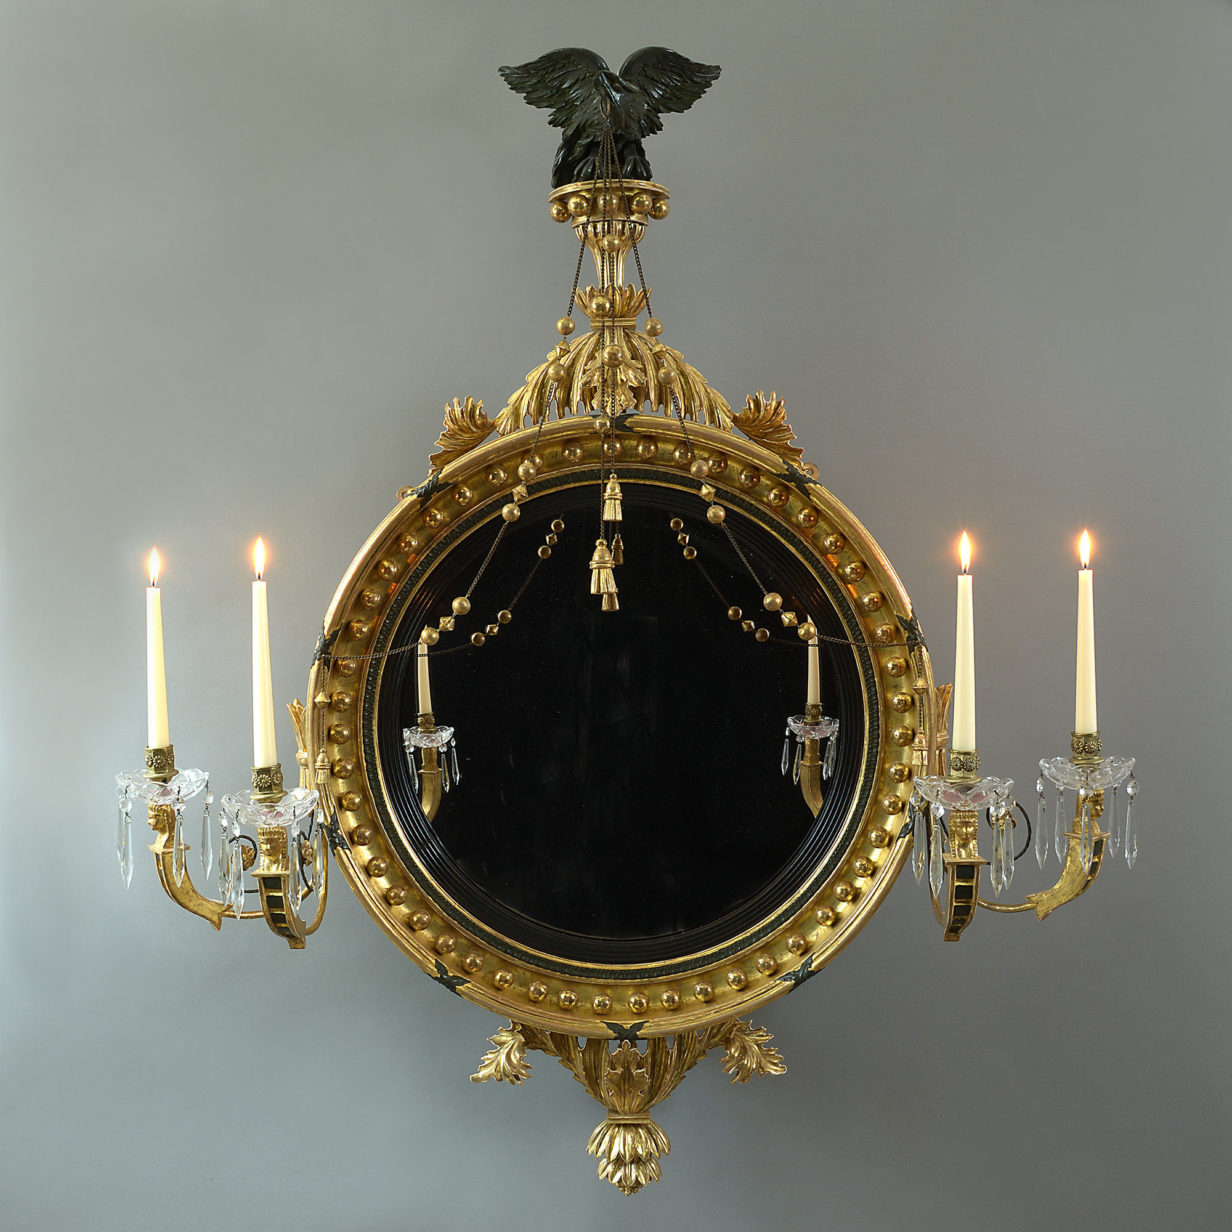 An important 19th century regency period convex mirror by fentham of london